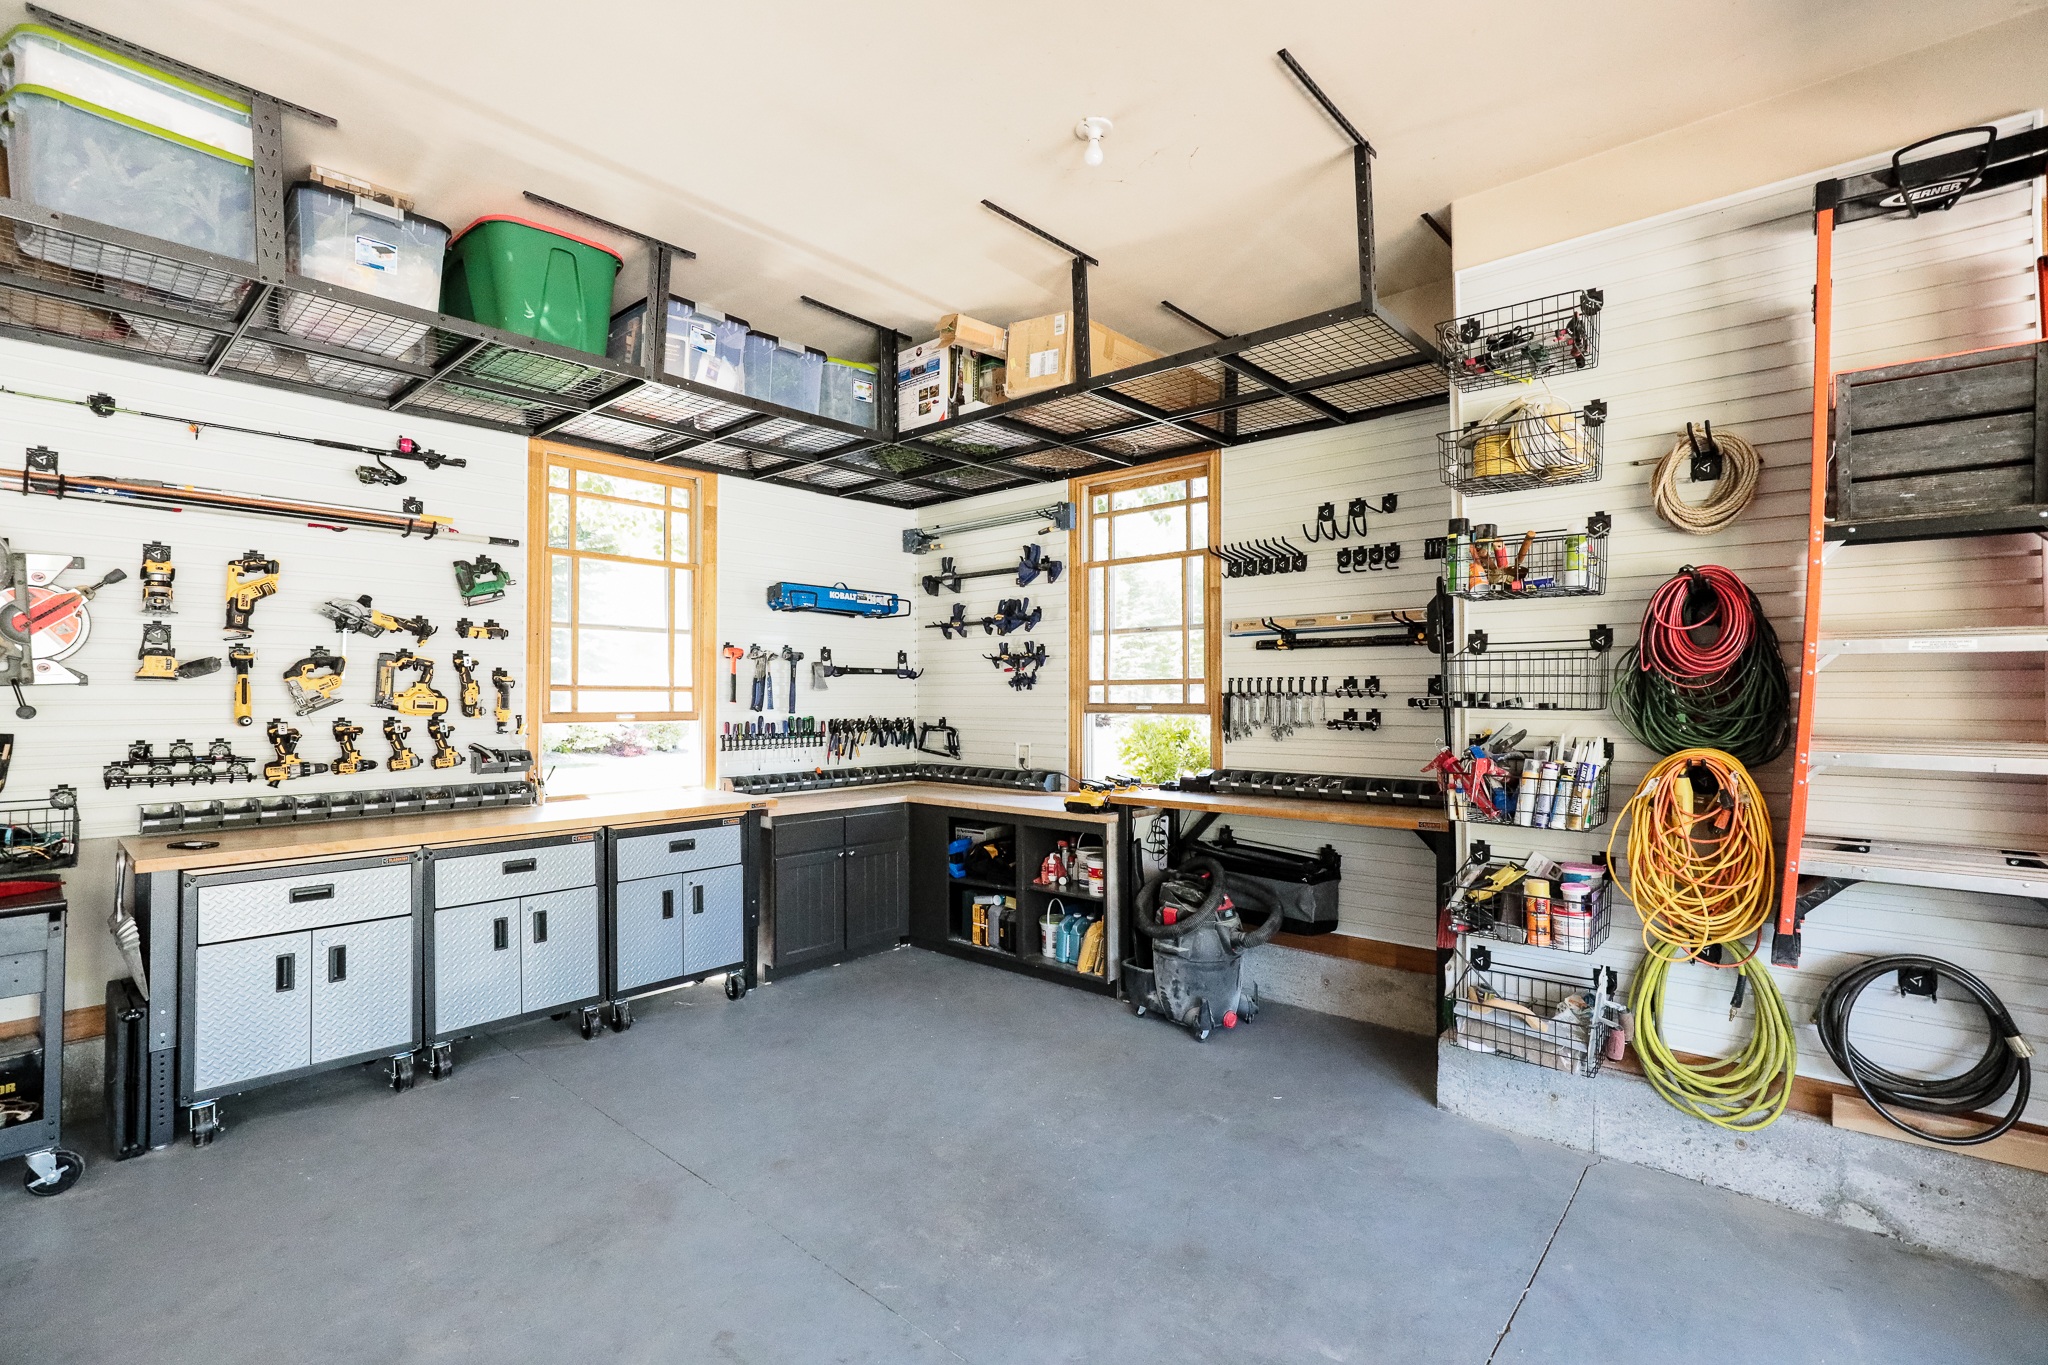 Custom Garage Wall Storage Systems, Accessories, and Installation